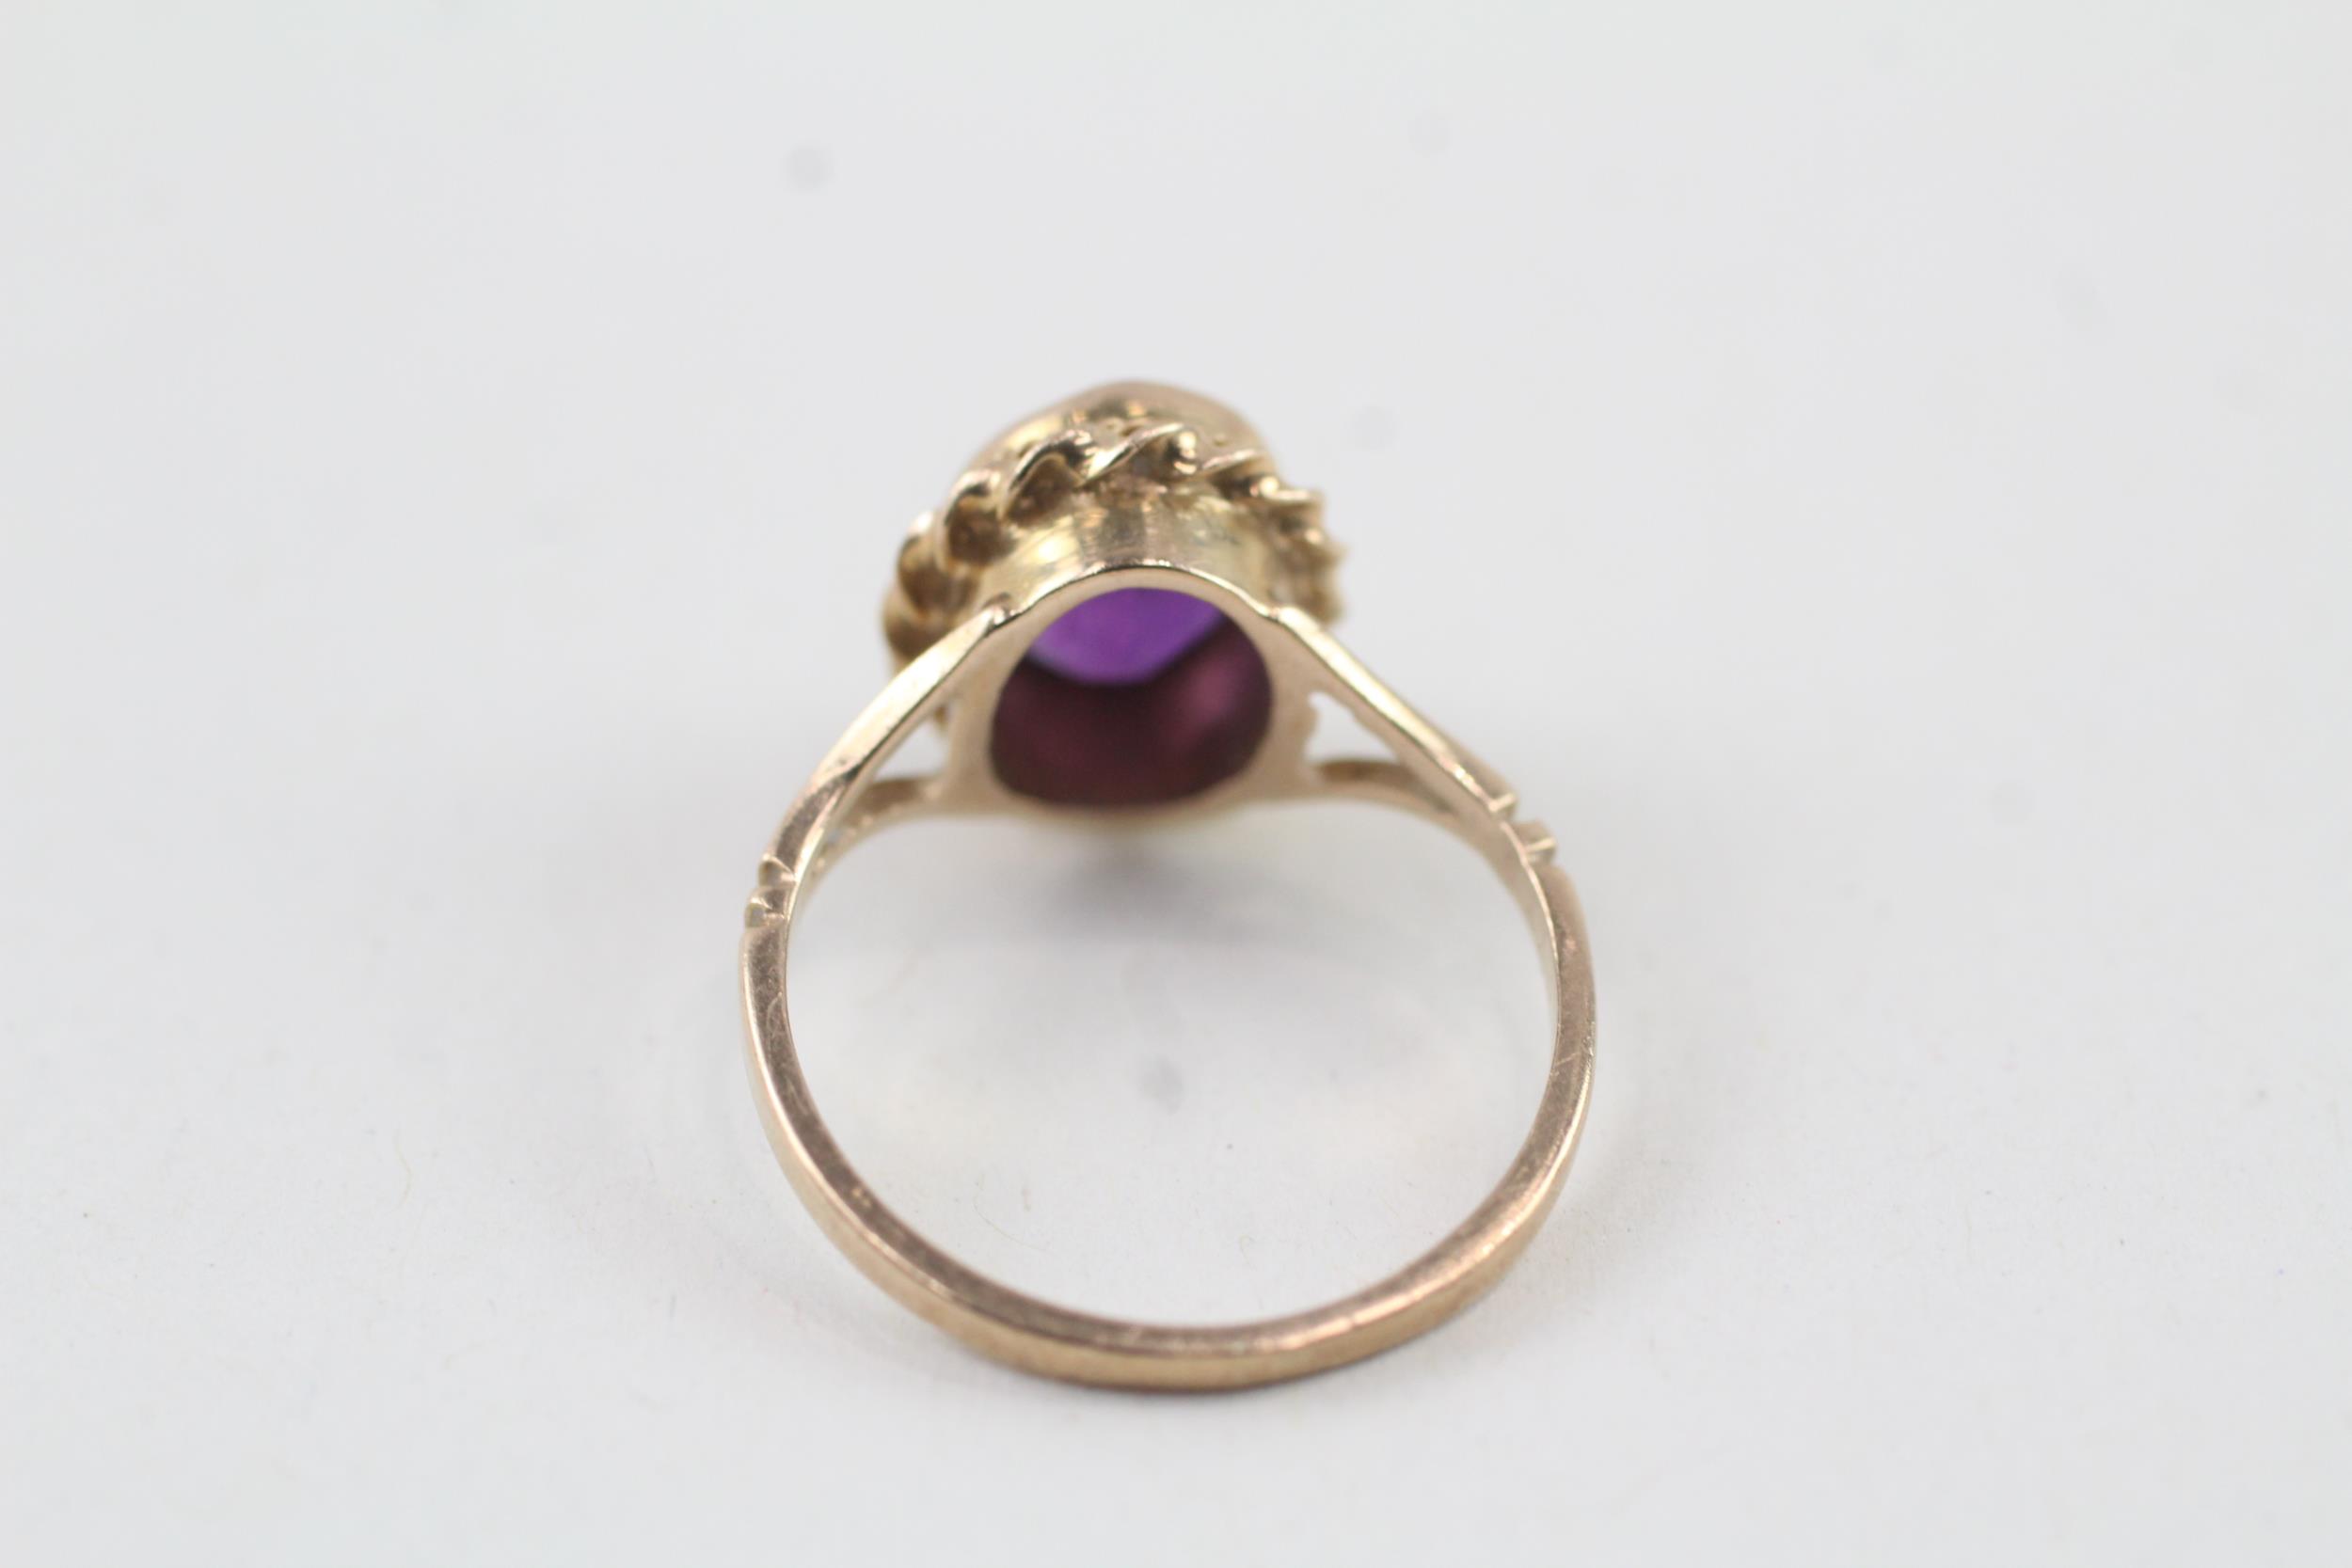 9ct gold amethyst single stone ring Size L 2.6 g - Image 4 of 5